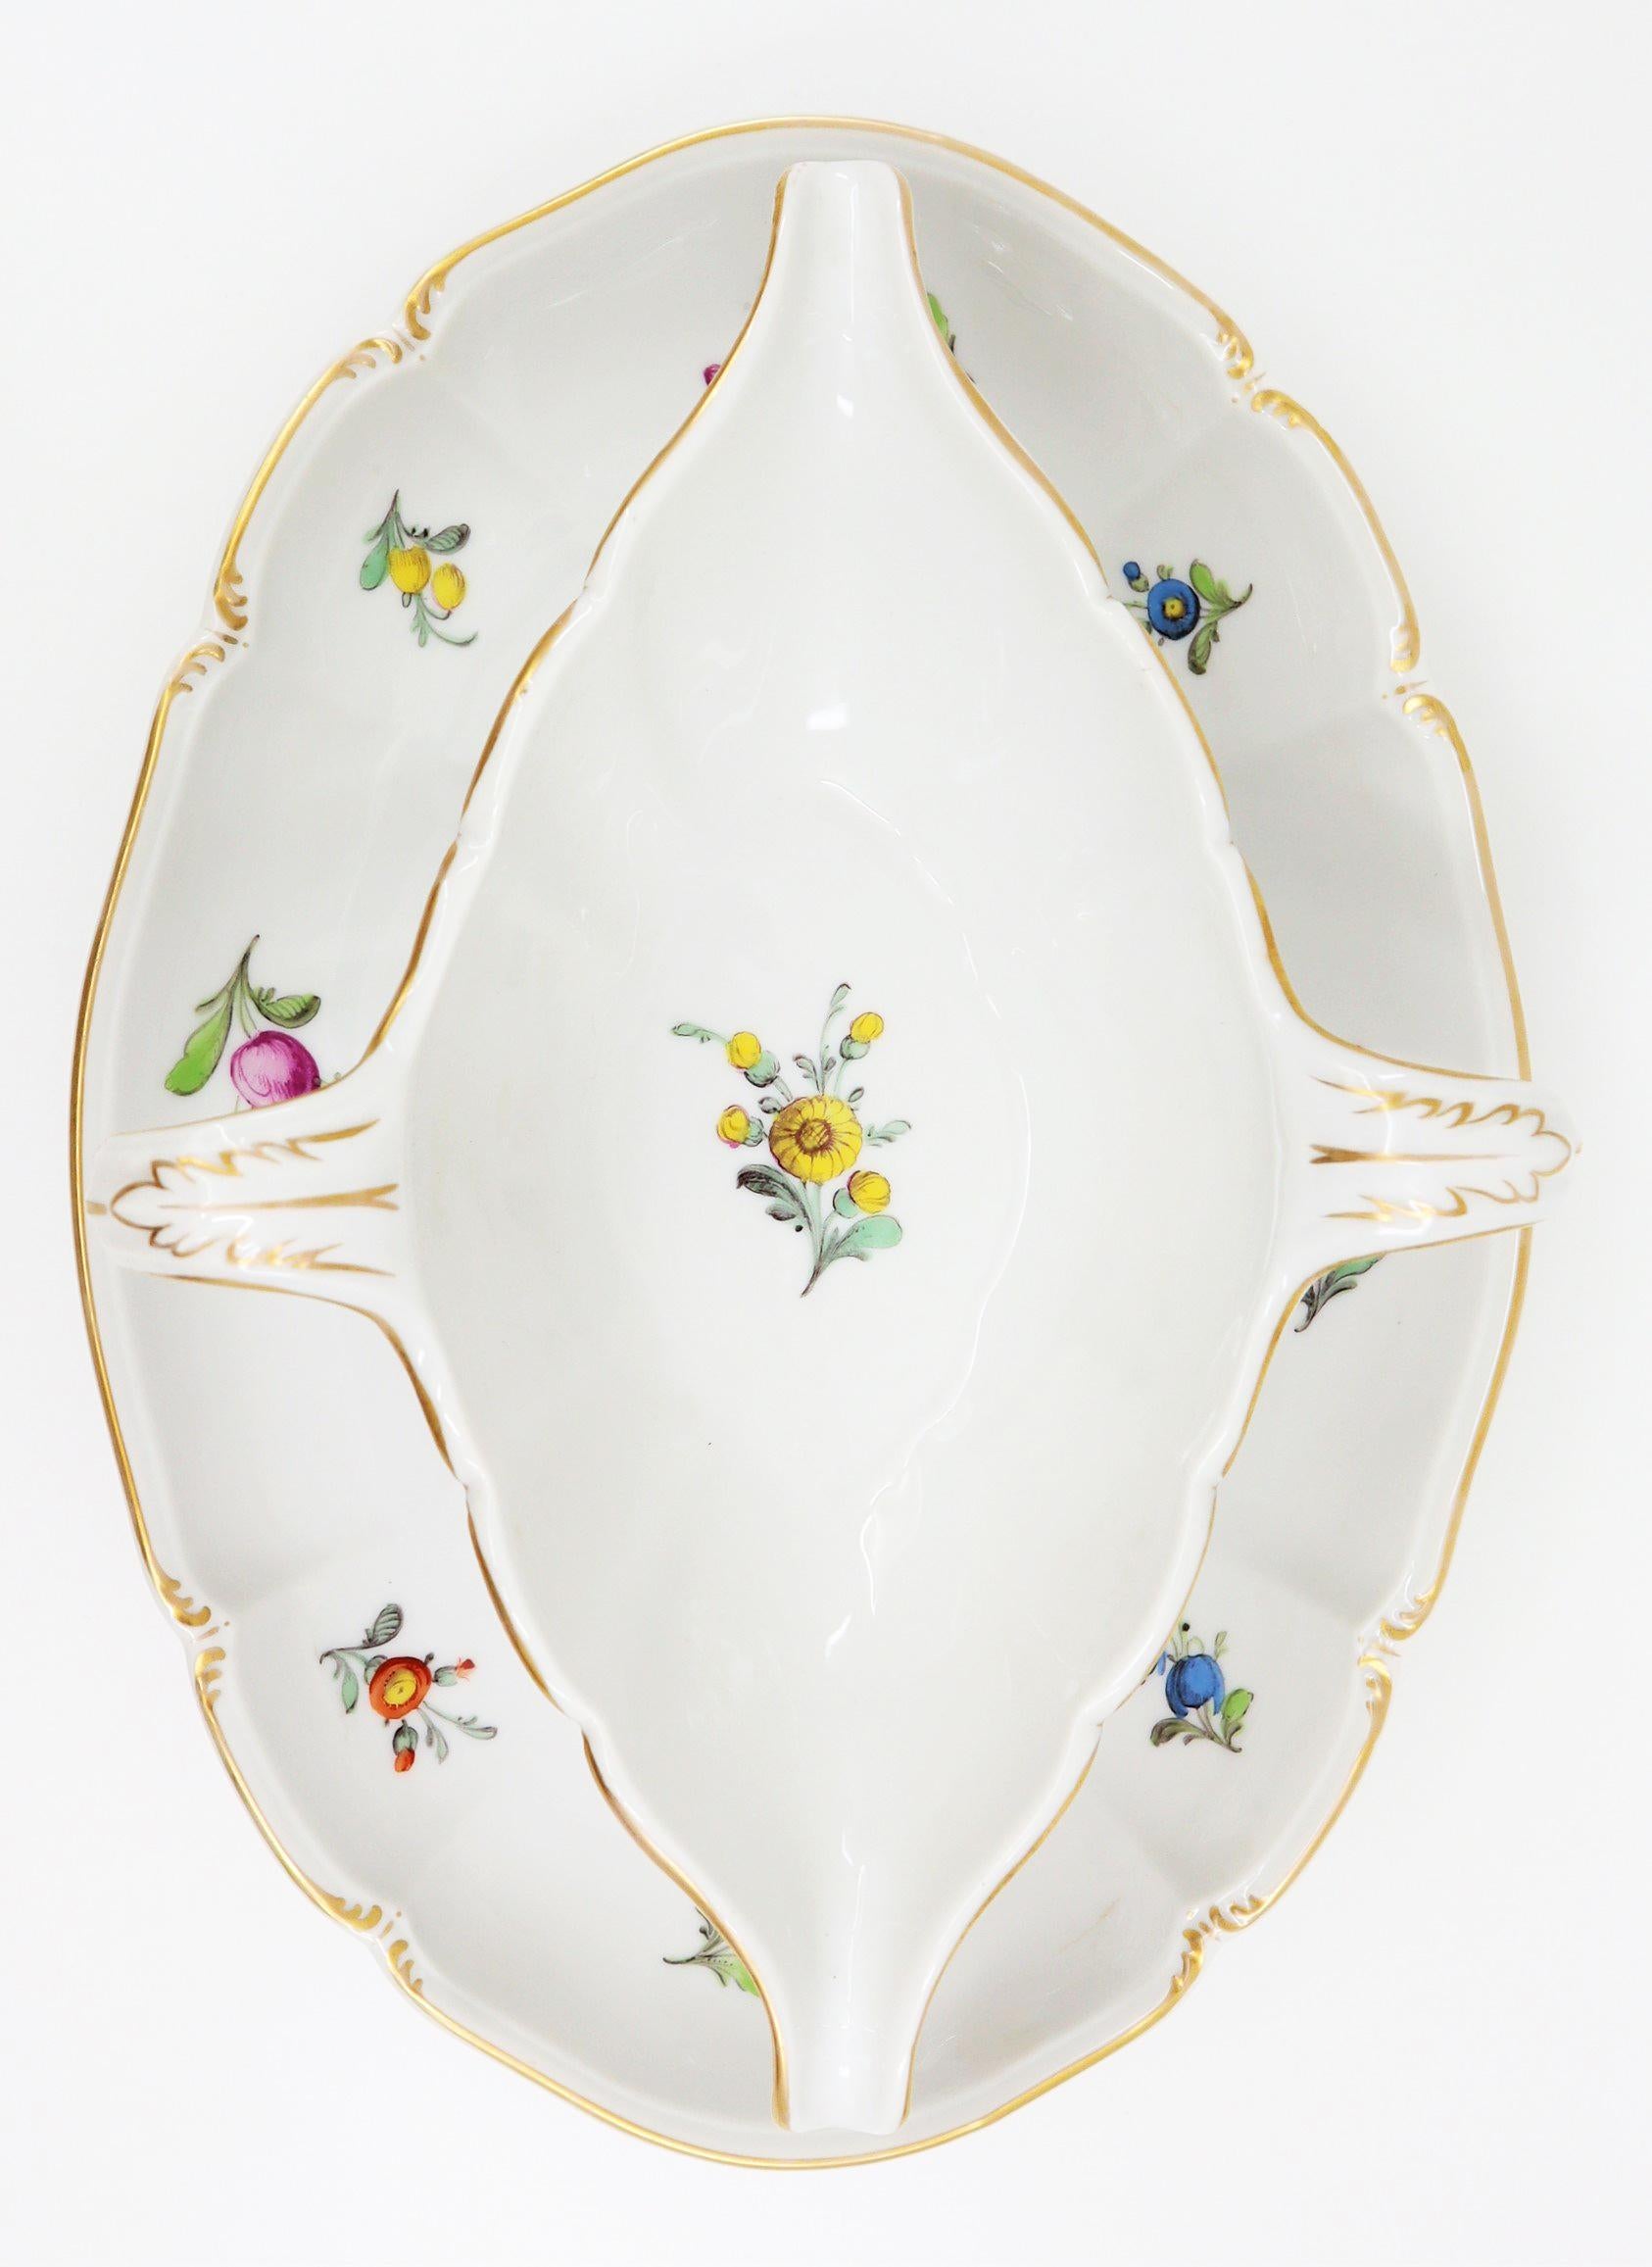 Dinner Service, 19th Century Porcelain, German, Hand Painted with Flowers Décor 8